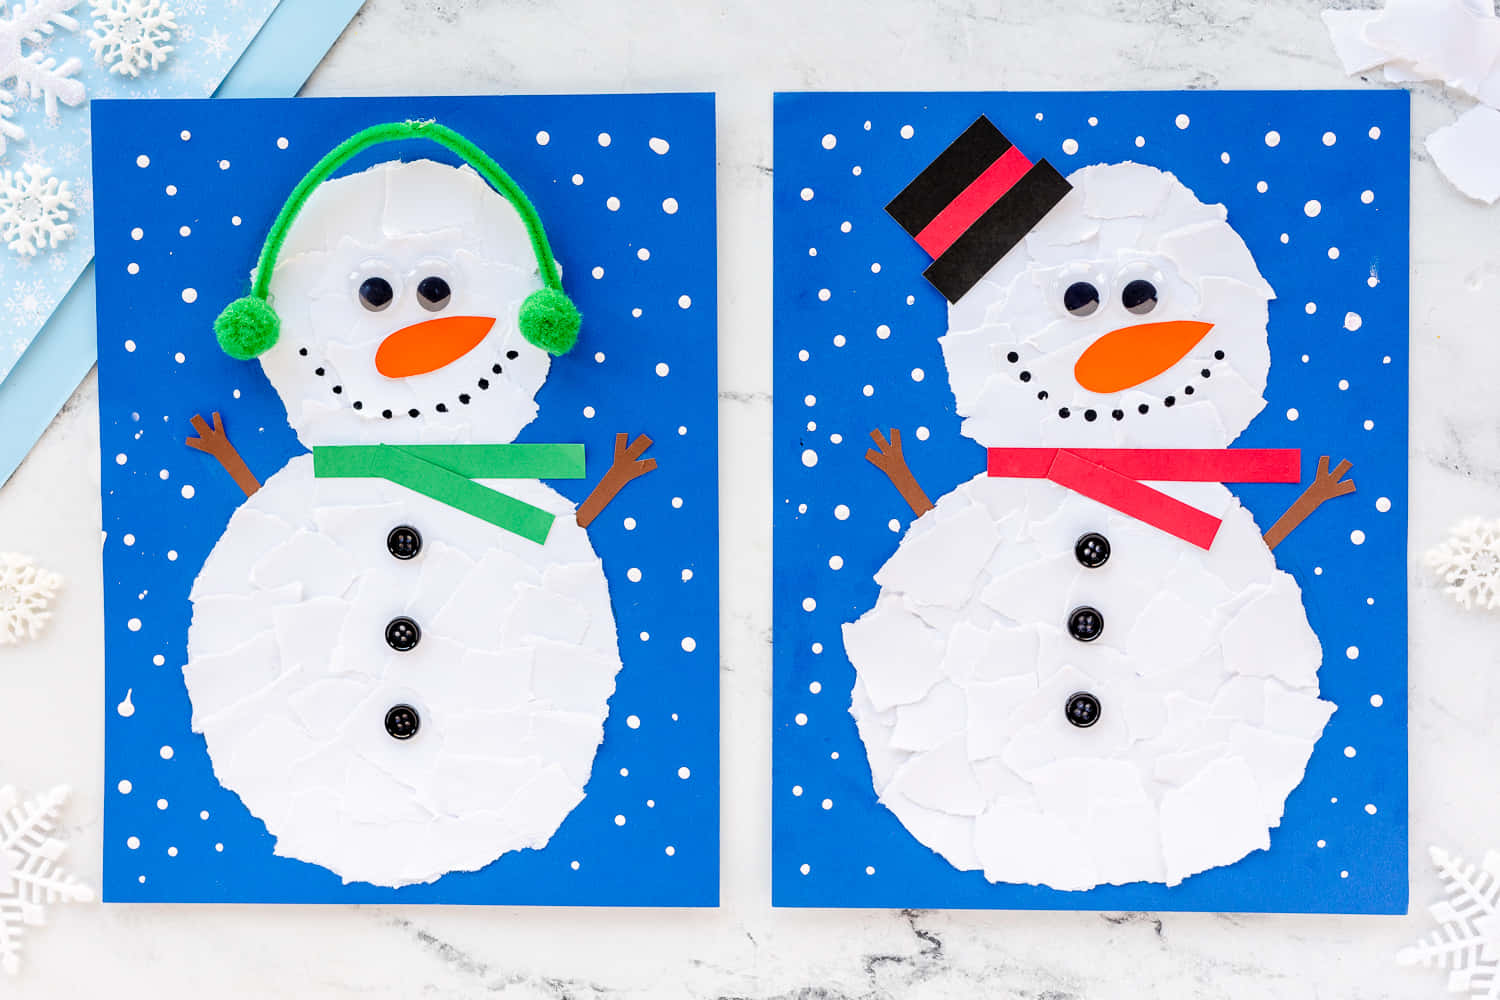 Two Snowman Crafts With Snowflakes On Them